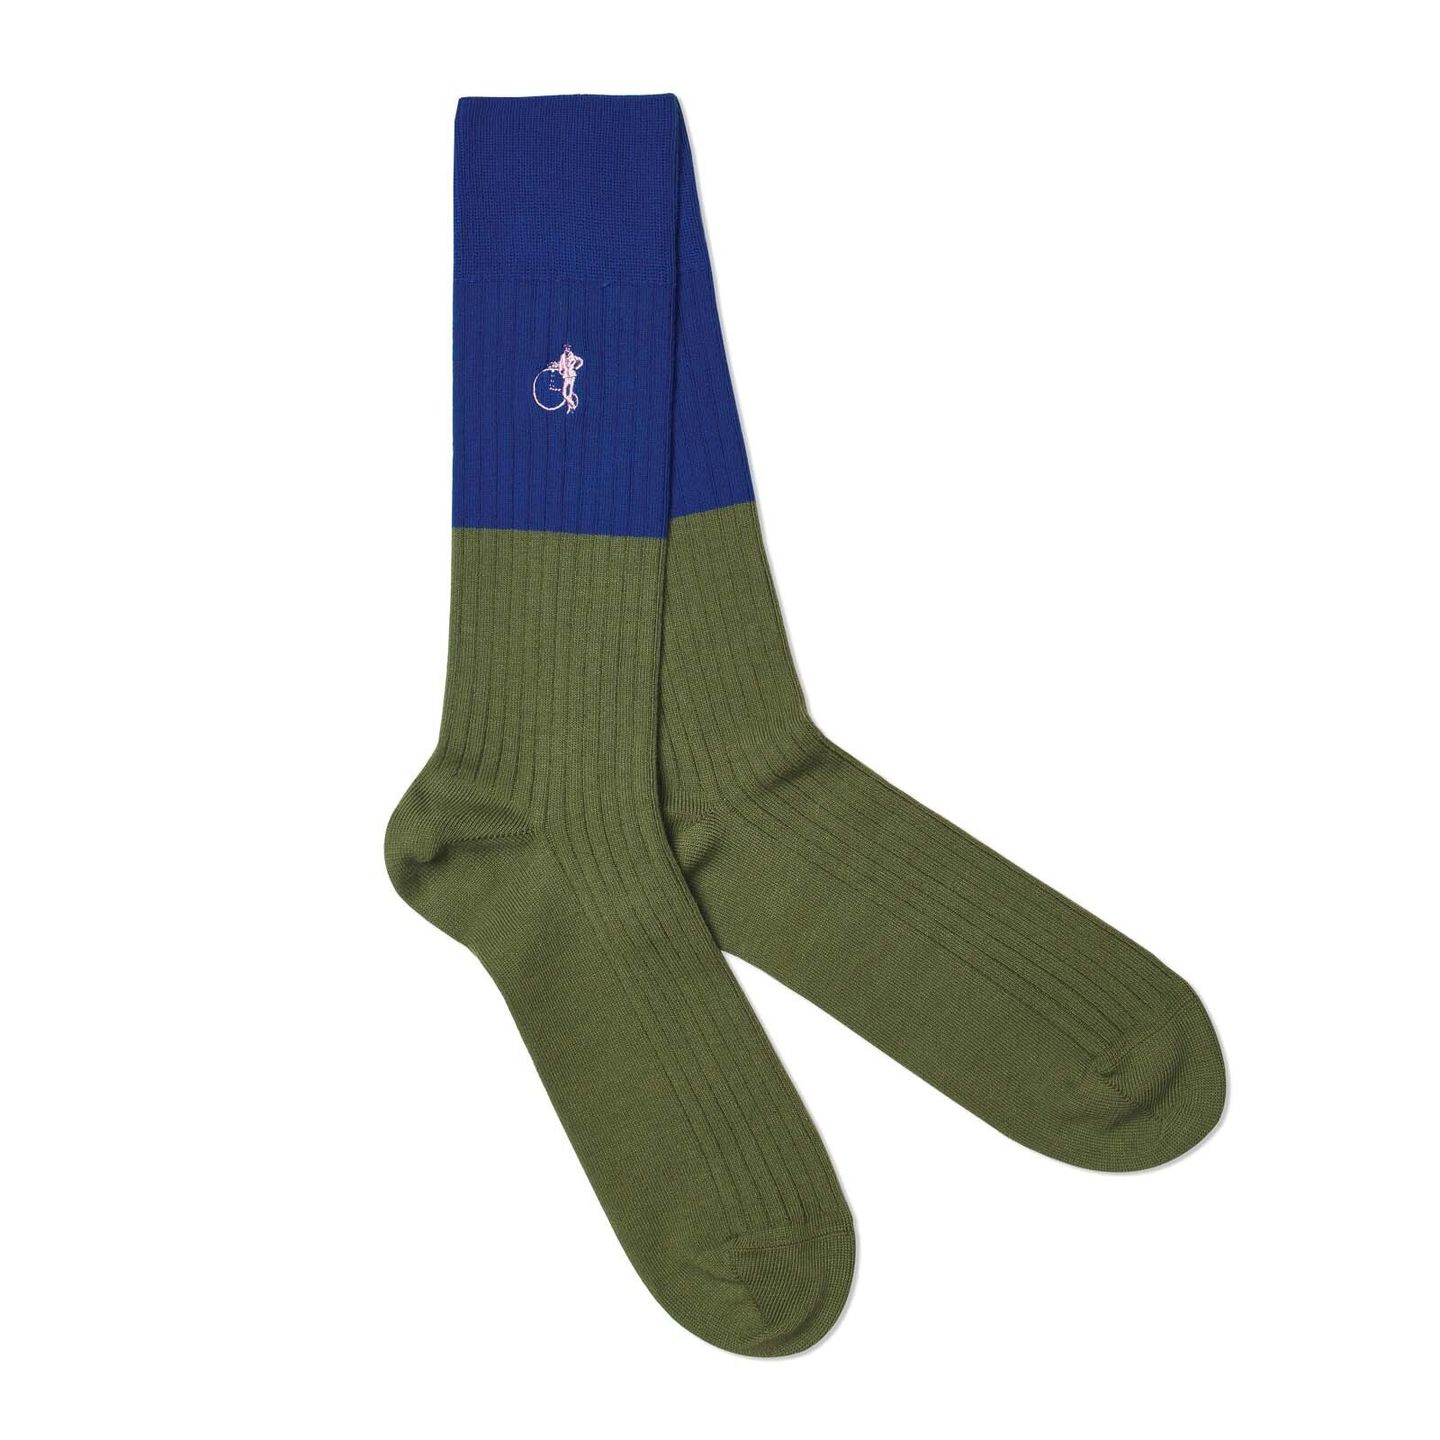 Dual coloured socks with a royal blue top and olive green bottom